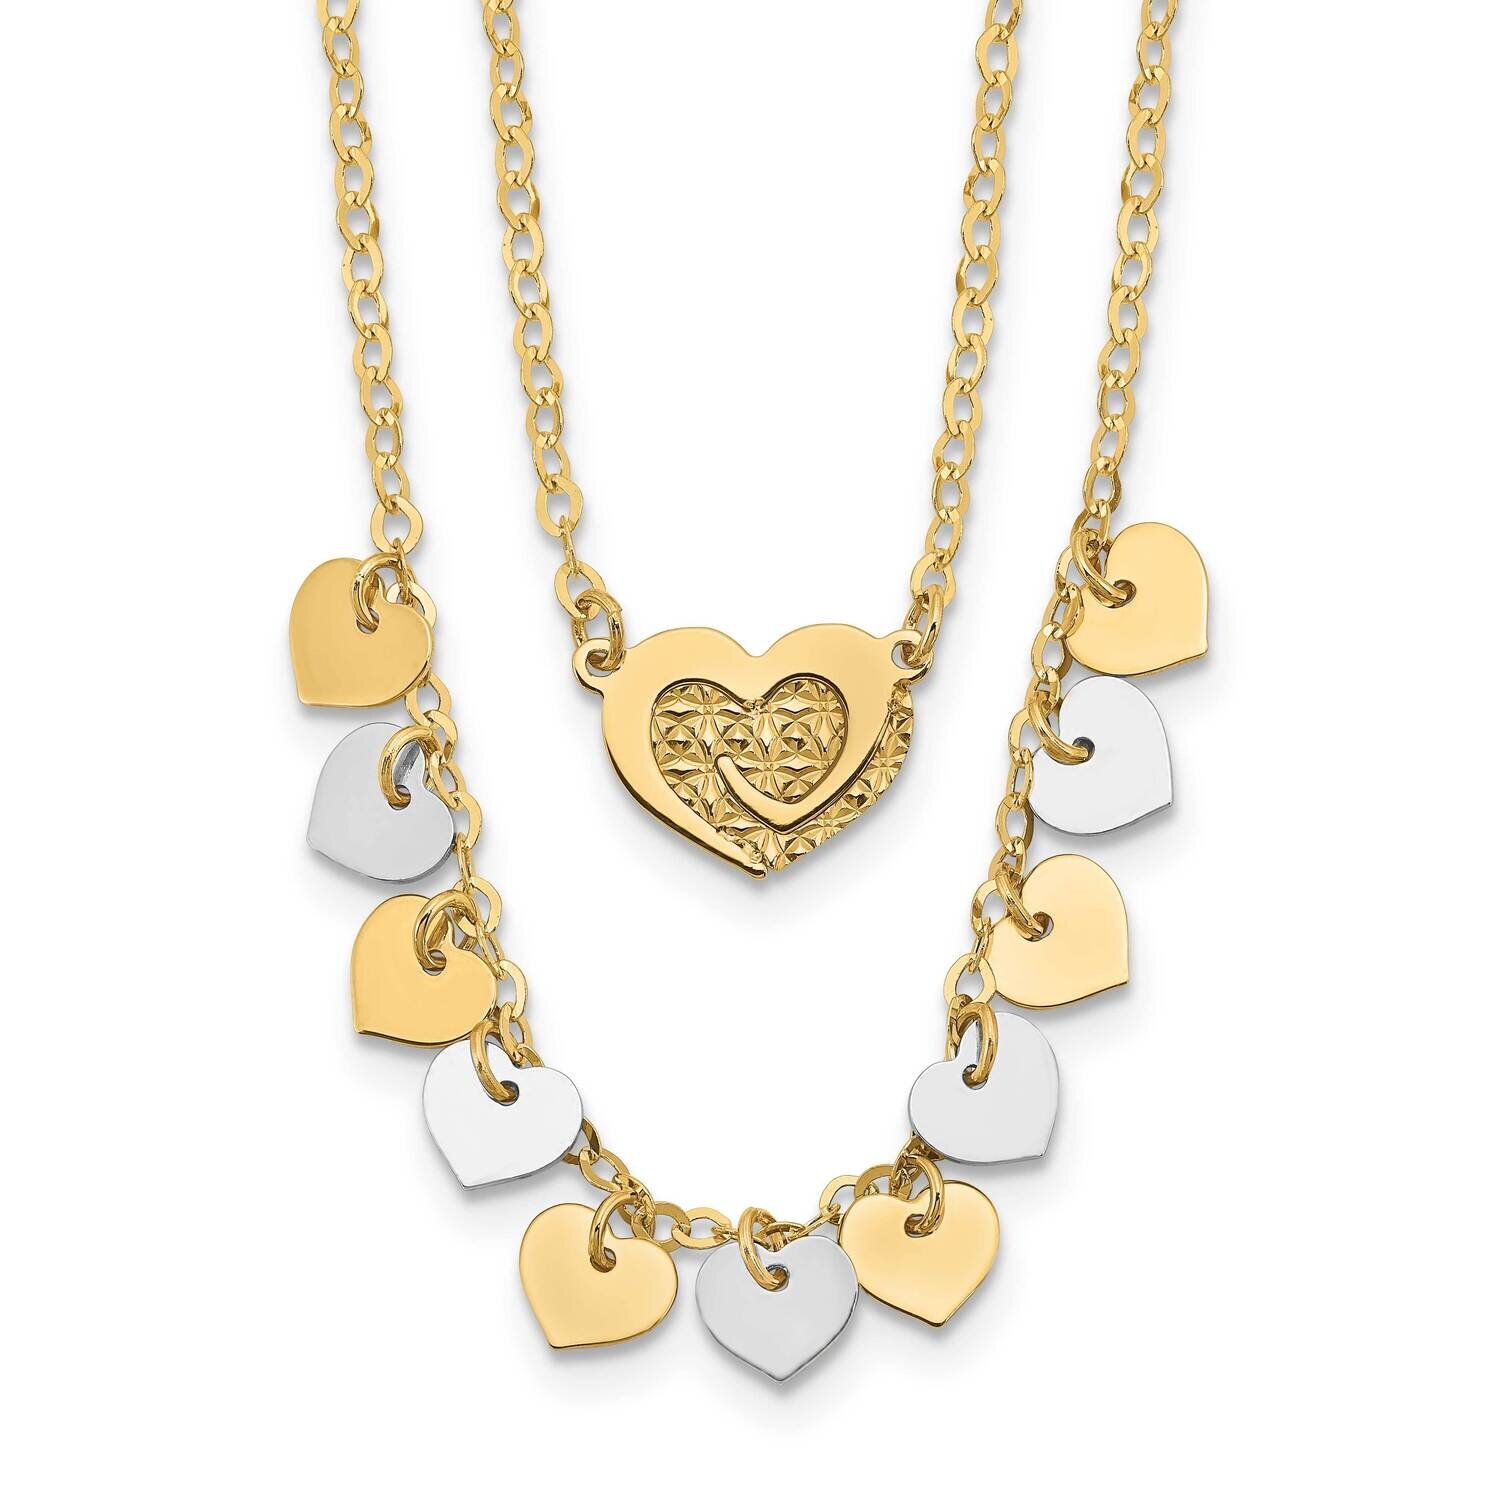 Double Strand with Hearts Necklace 17 Inch 14k Two-Tone Gold Polished SF2941-17